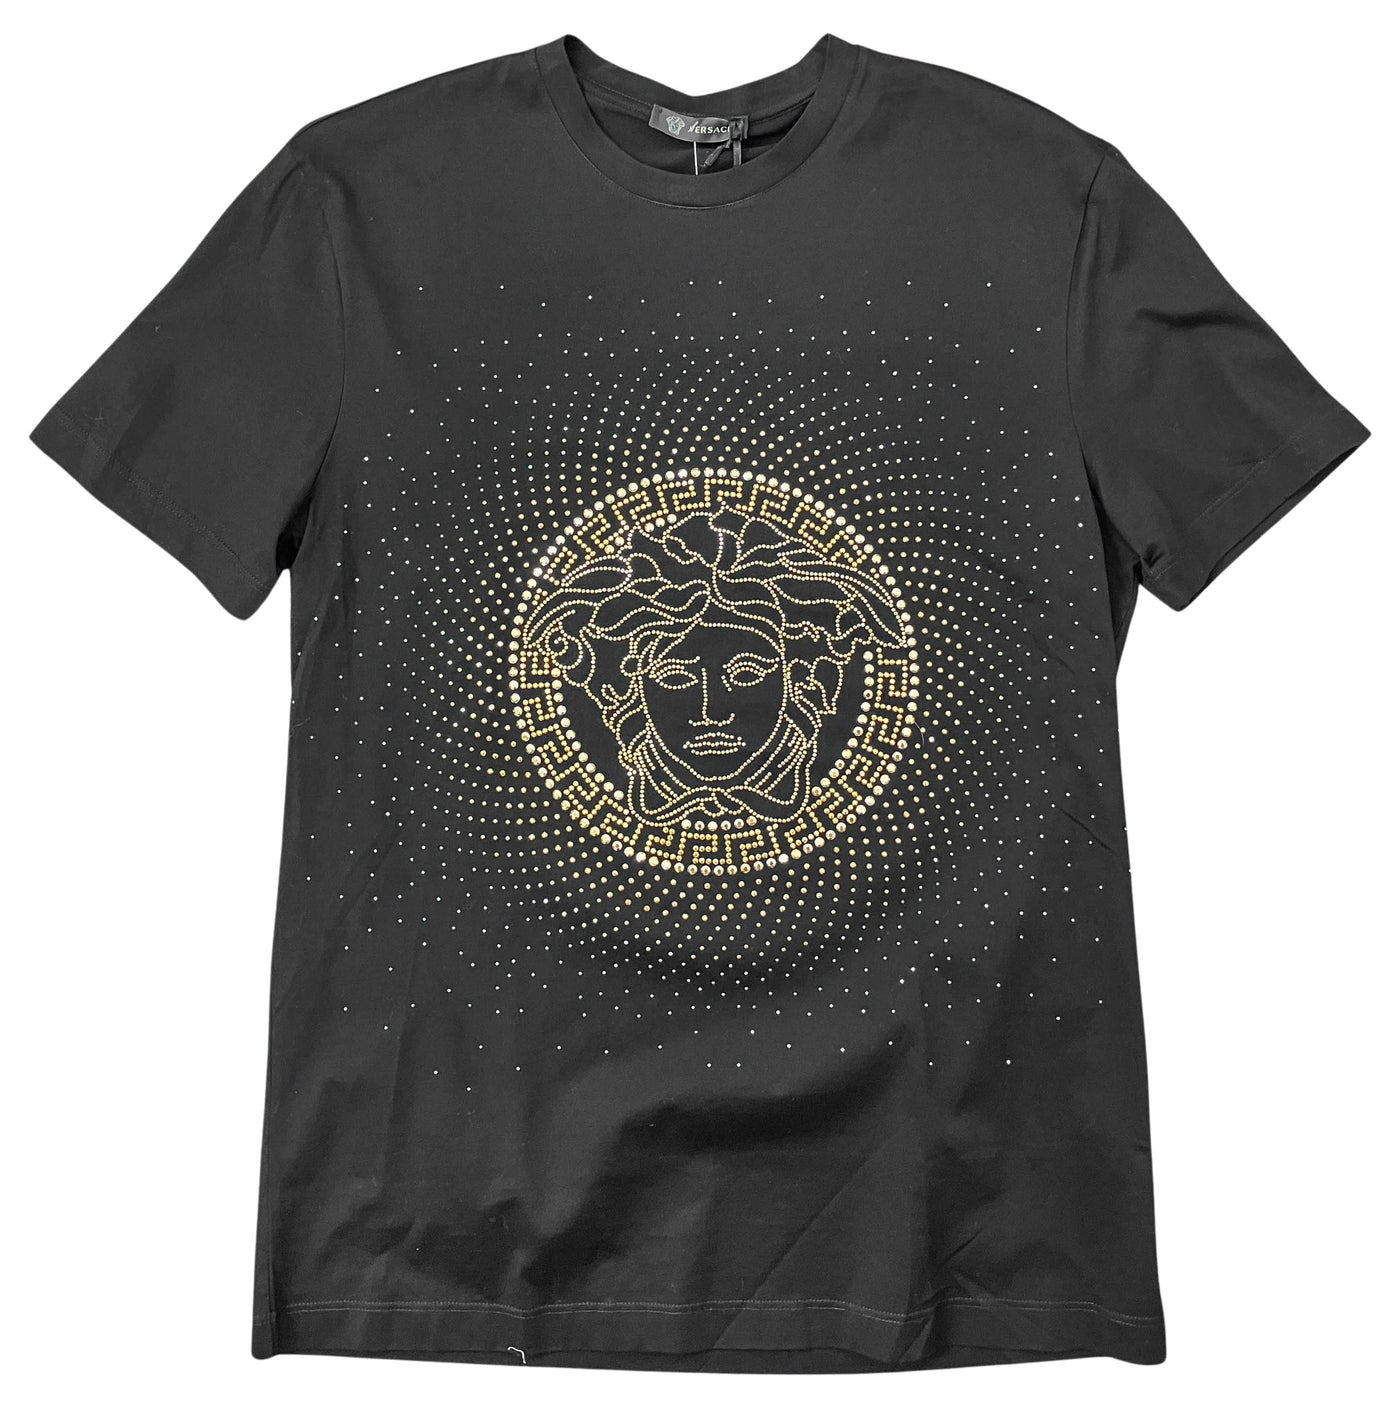 Versace Circle Medusa Tee in Black and Gold - Discounts on Versace at UAL